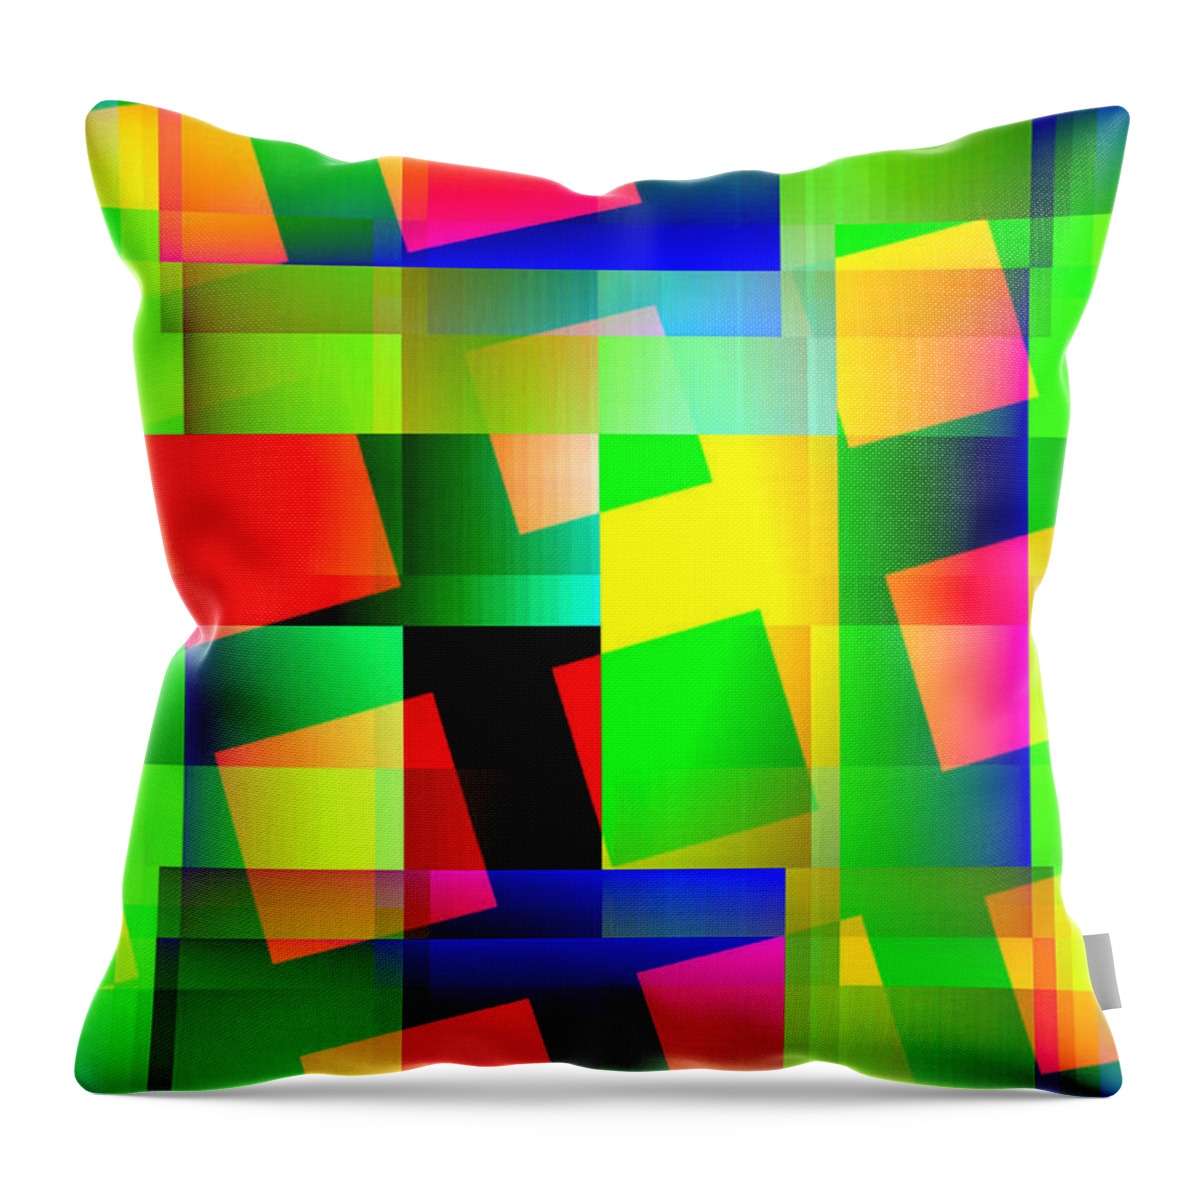 #abstracts #acrylic #artgallery # #artist #artnews # #artwork # #callforart #callforentries #colour #creative # #paint #painting #paintings #photograph #photography #photoshoot #photoshop #photoshopped Throw Pillow featuring the digital art Breaking Boundaries Part 2 by The Lovelock experience